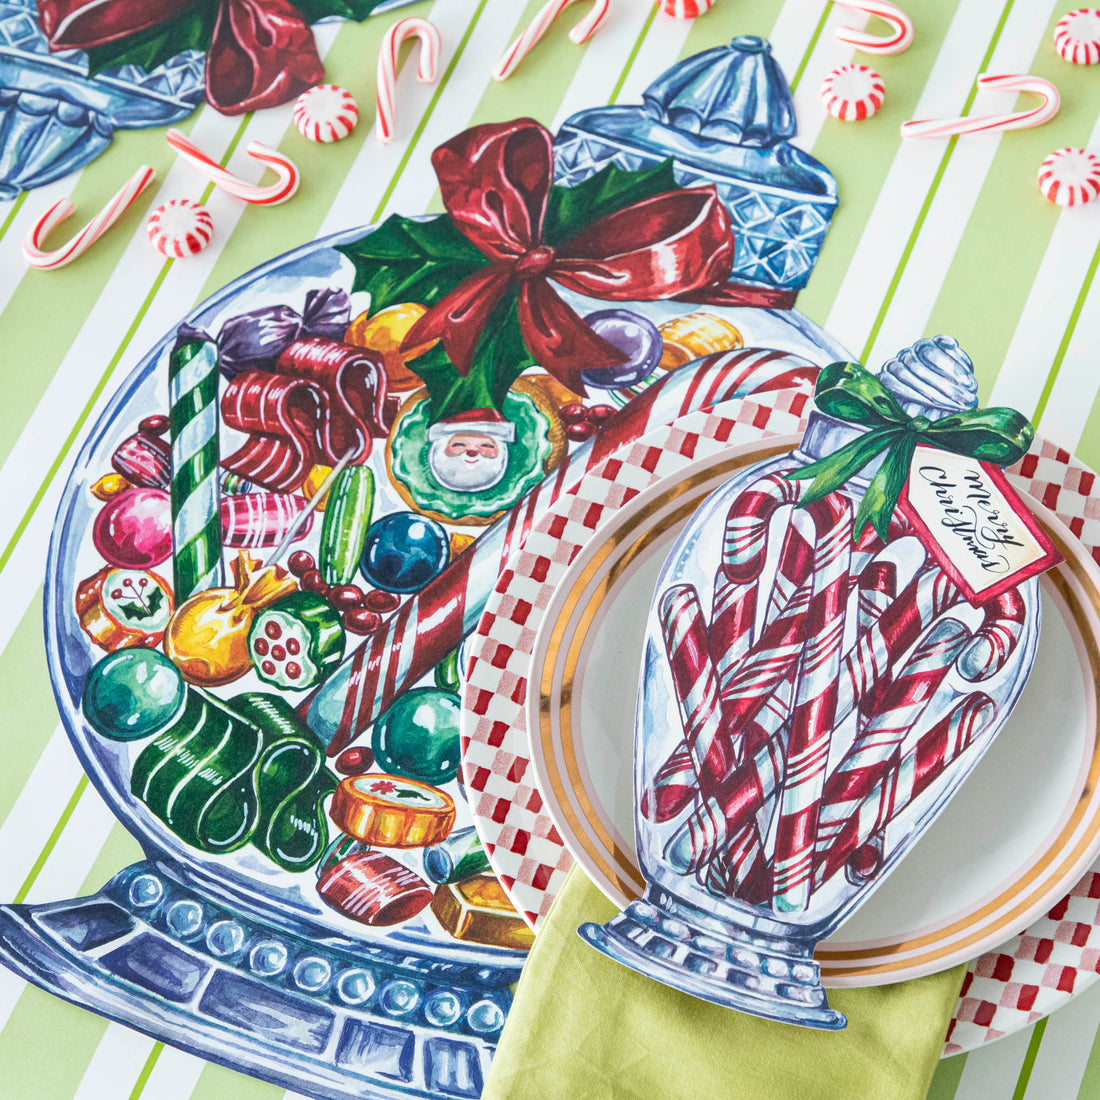 The Die-cut Candy Jar Placemat under a vibrant Christmas-themed table setting.